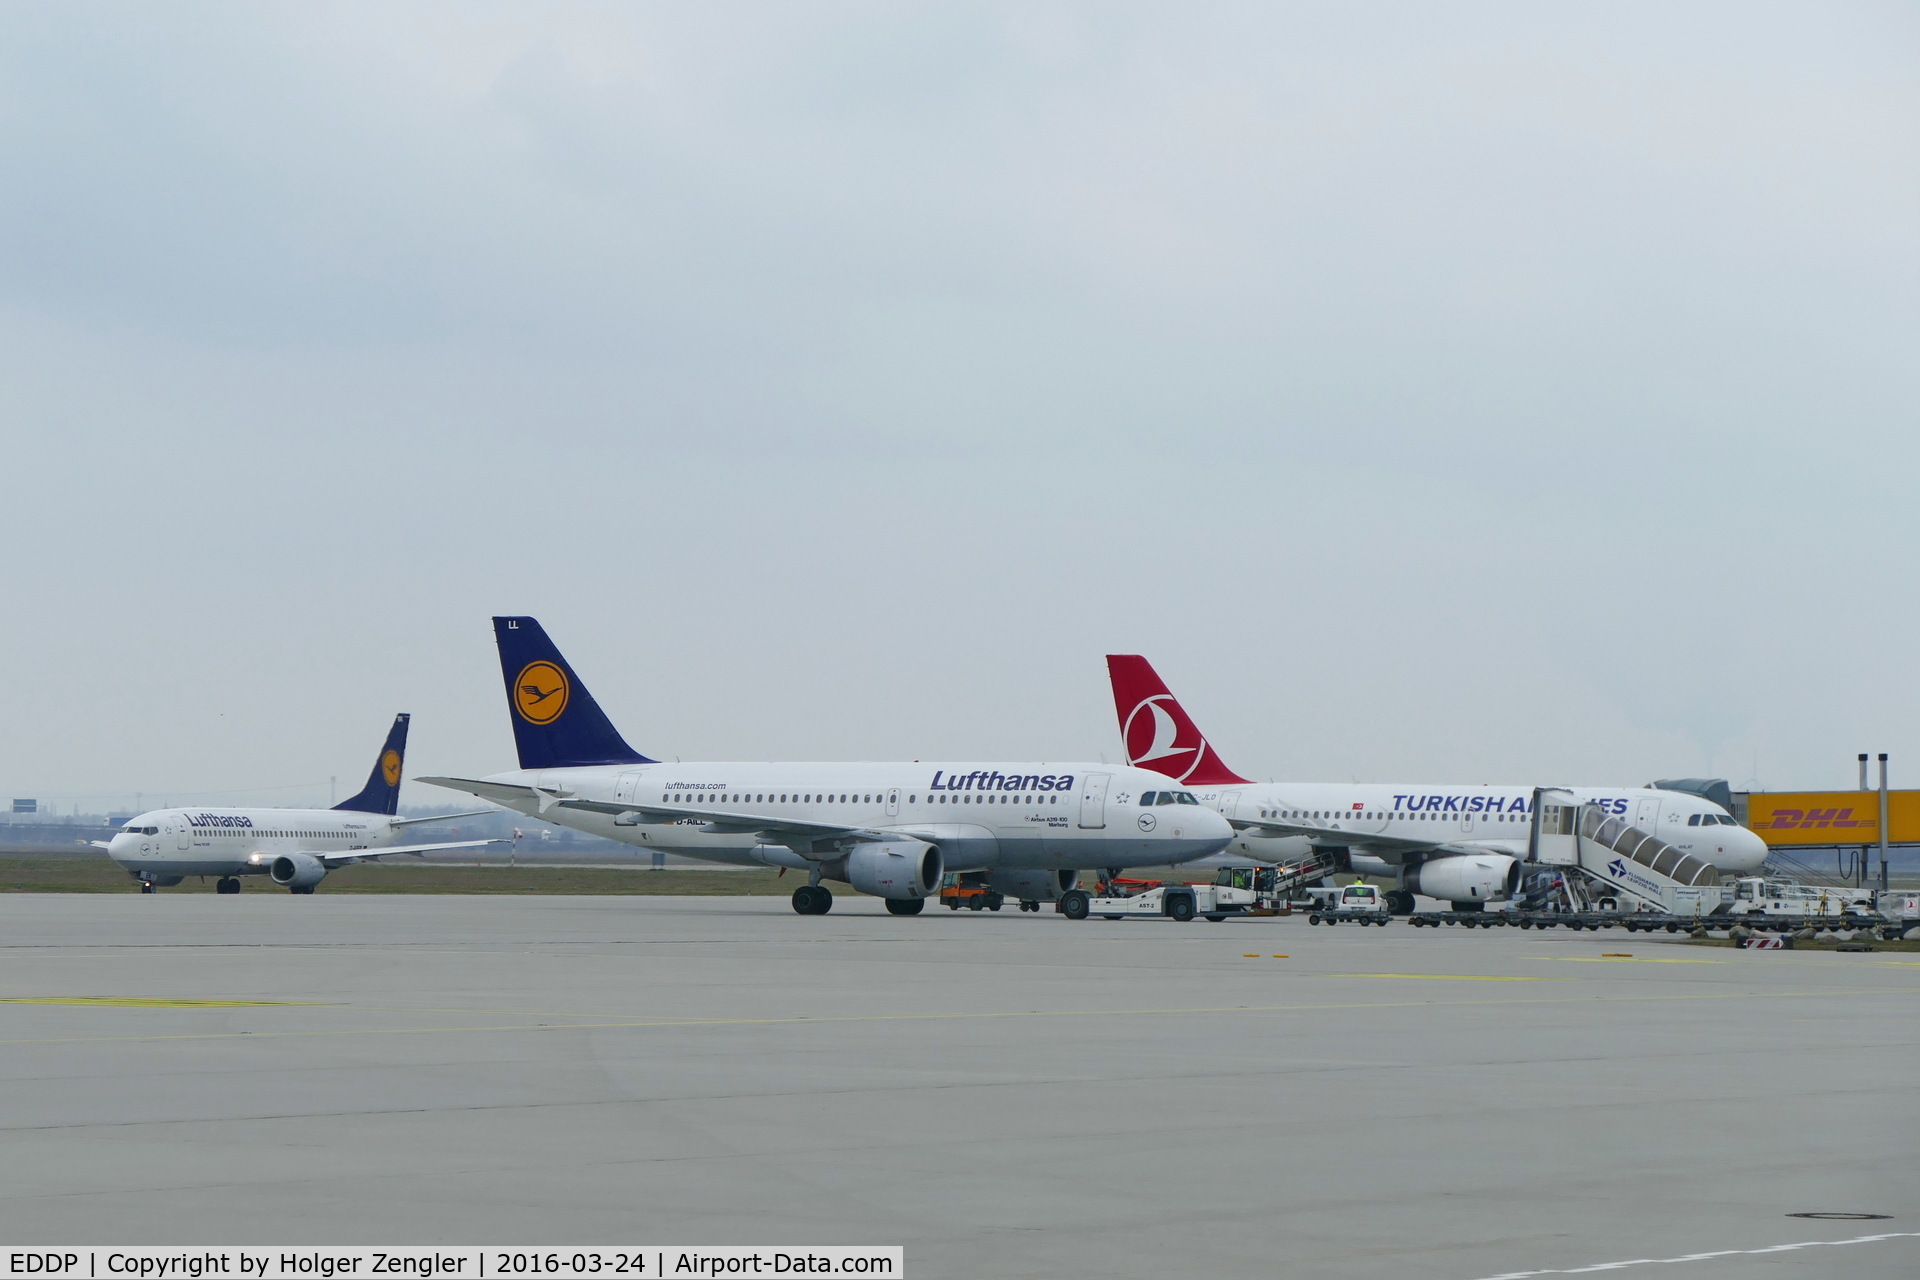 Leipzig/Halle Airport, Leipzig/Halle Germany (EDDP) - Crowded apron 1 in March - how exciting is that!